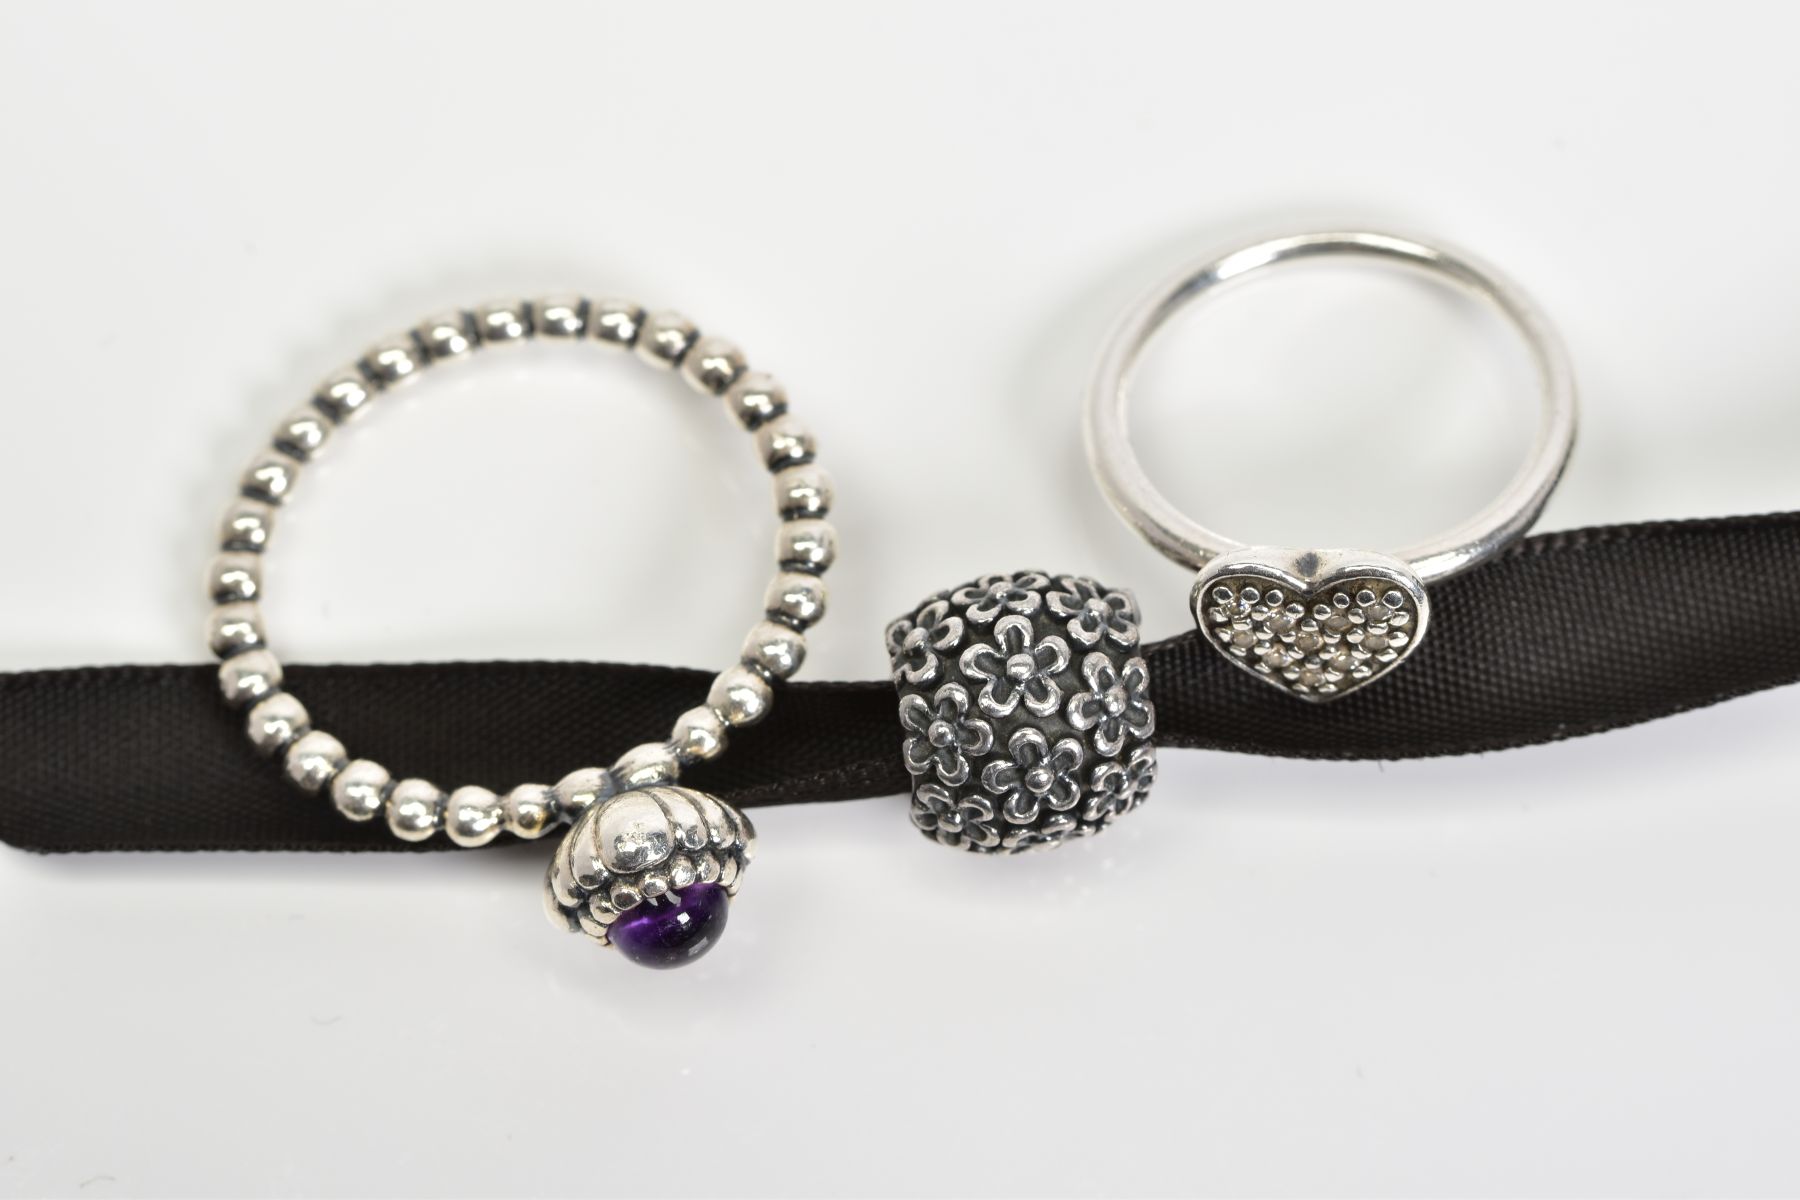 TWO PANDORA RINGS AND A CHARM, the first ring designed with a central amethyst to the beaded band, - Image 2 of 3